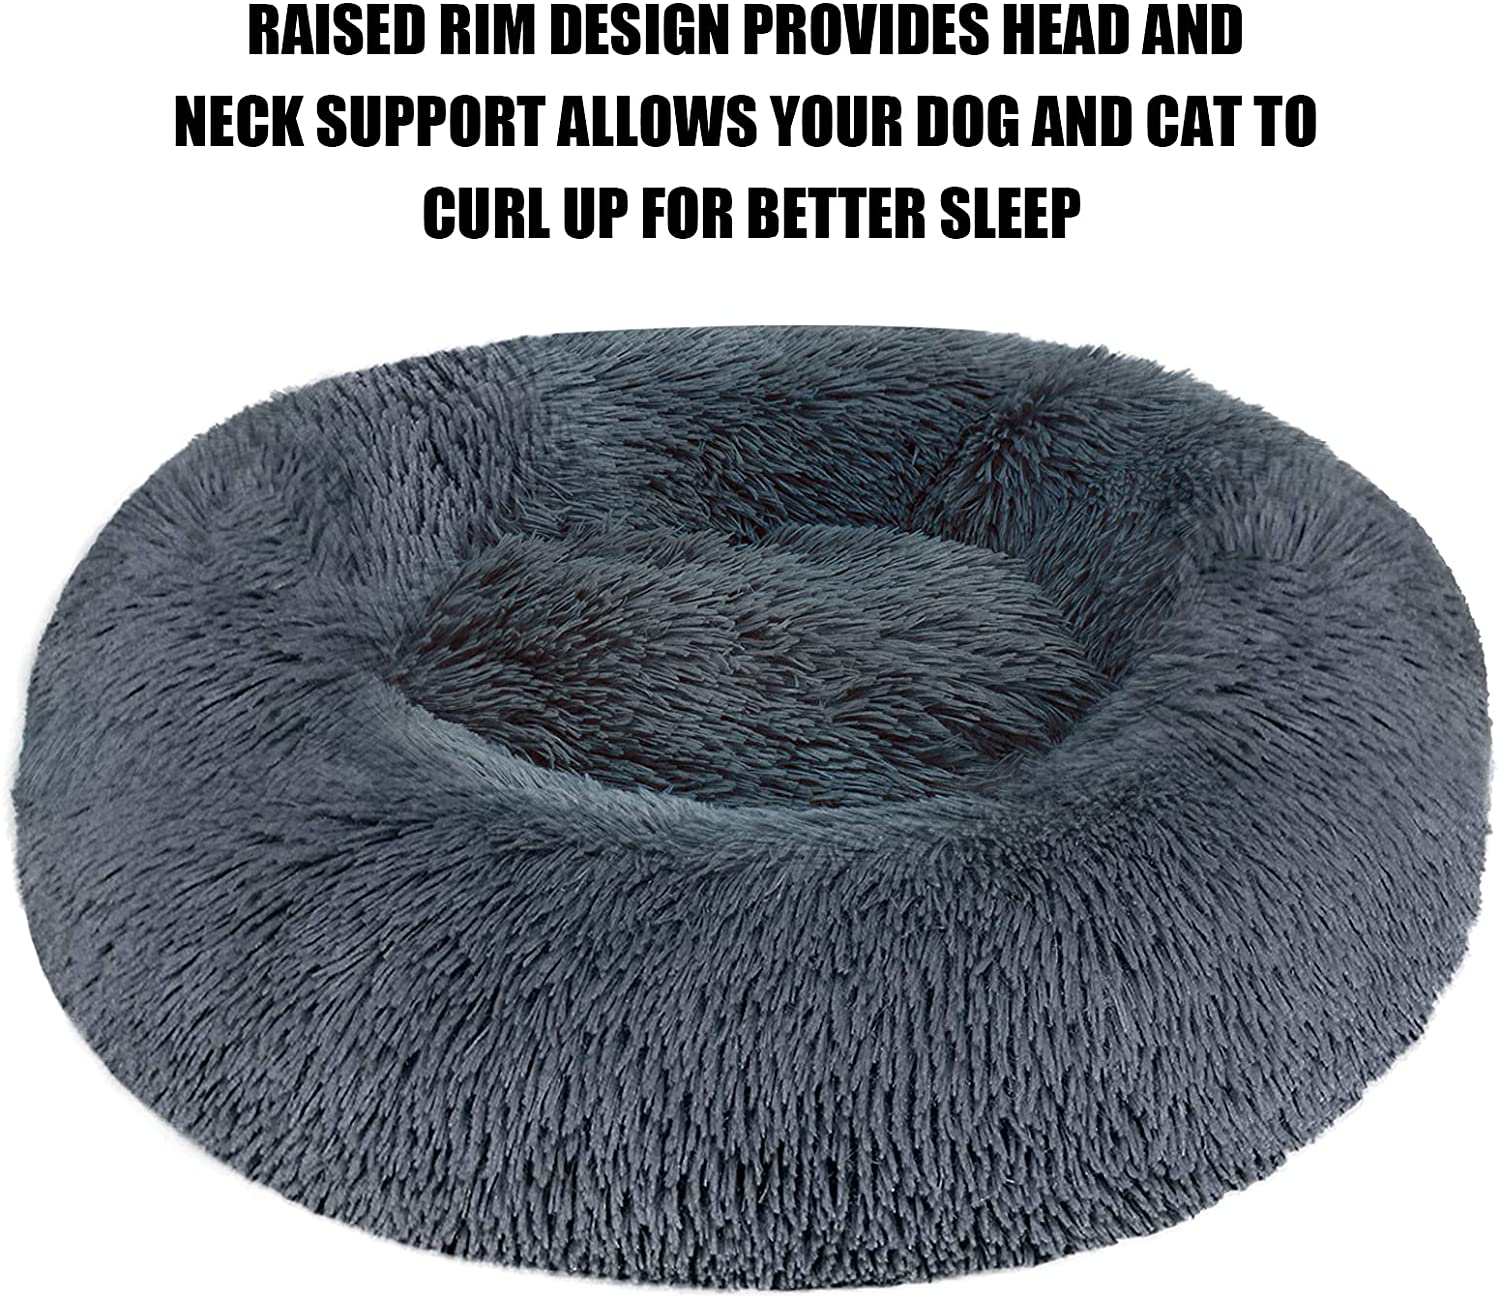 Calming Dog Bed Cat Bed Donut Cuddler, anti Anxiety Dog Bed for Small Medium Large Dogs Cats, Machine Washable round Warm Bed, Faux Fur Pet Bed, Waterproof Non-Slip Bottom (23"/30"/36")